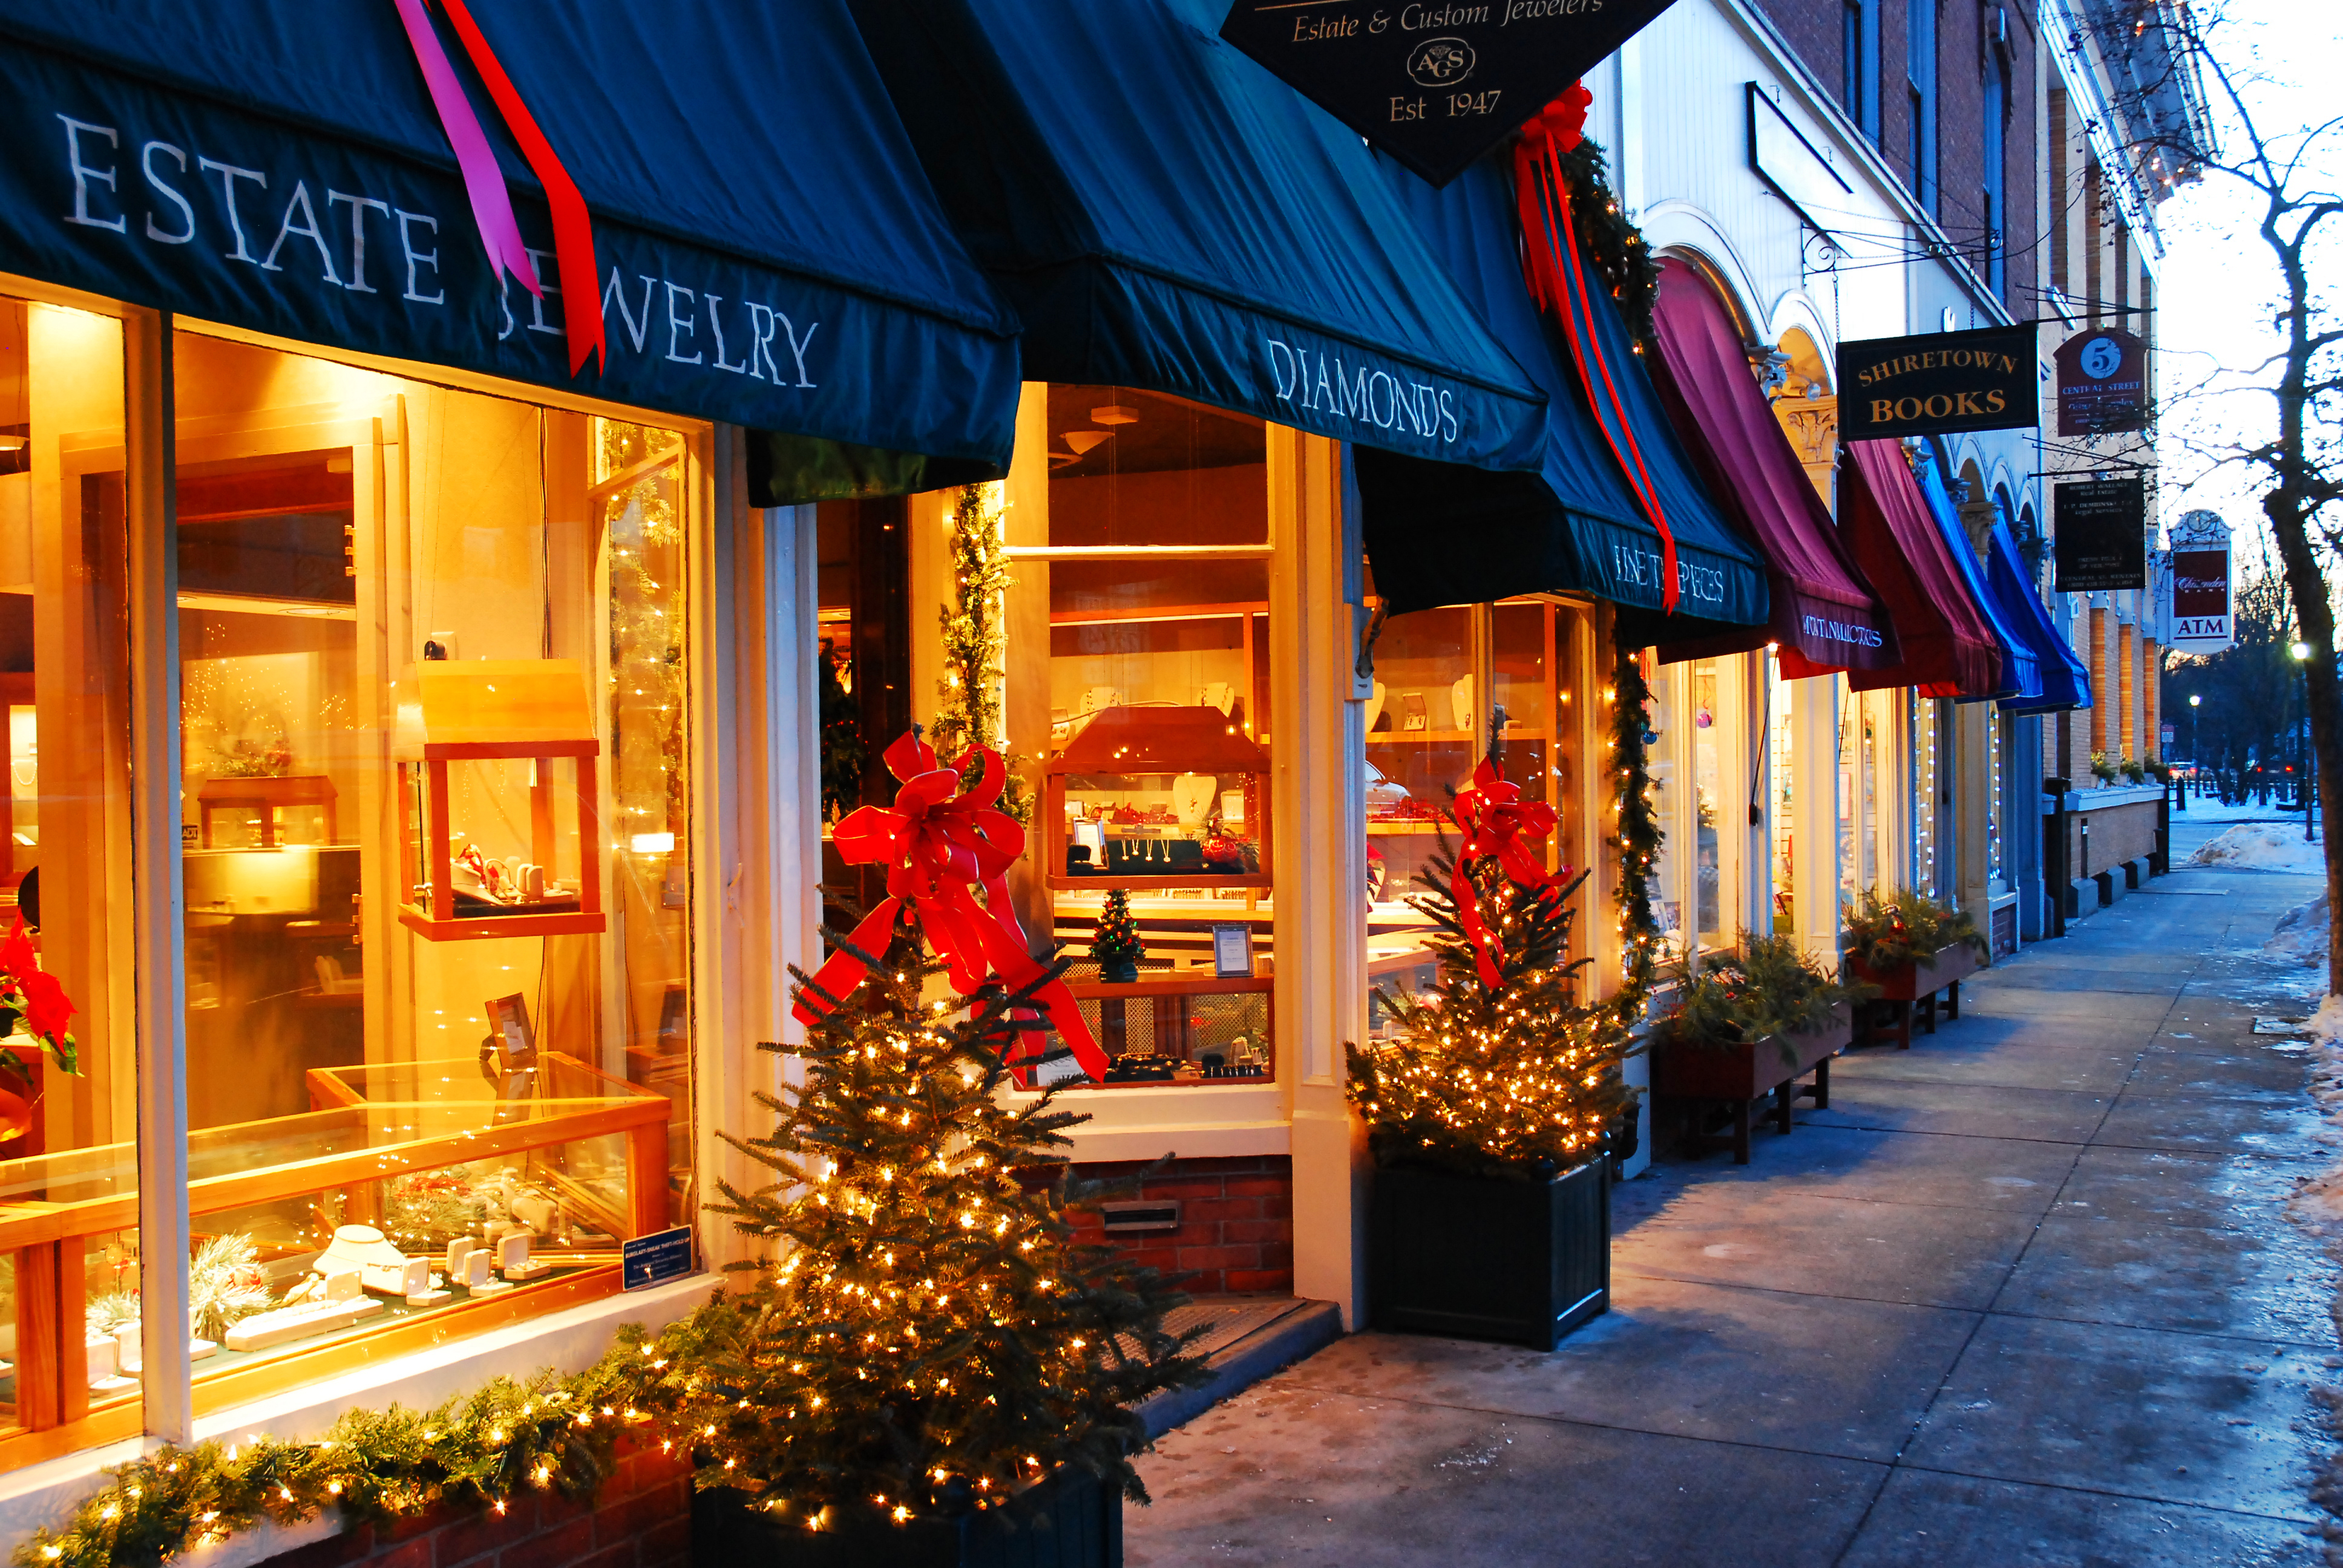  A picturesque shopping street decorated for Christmas